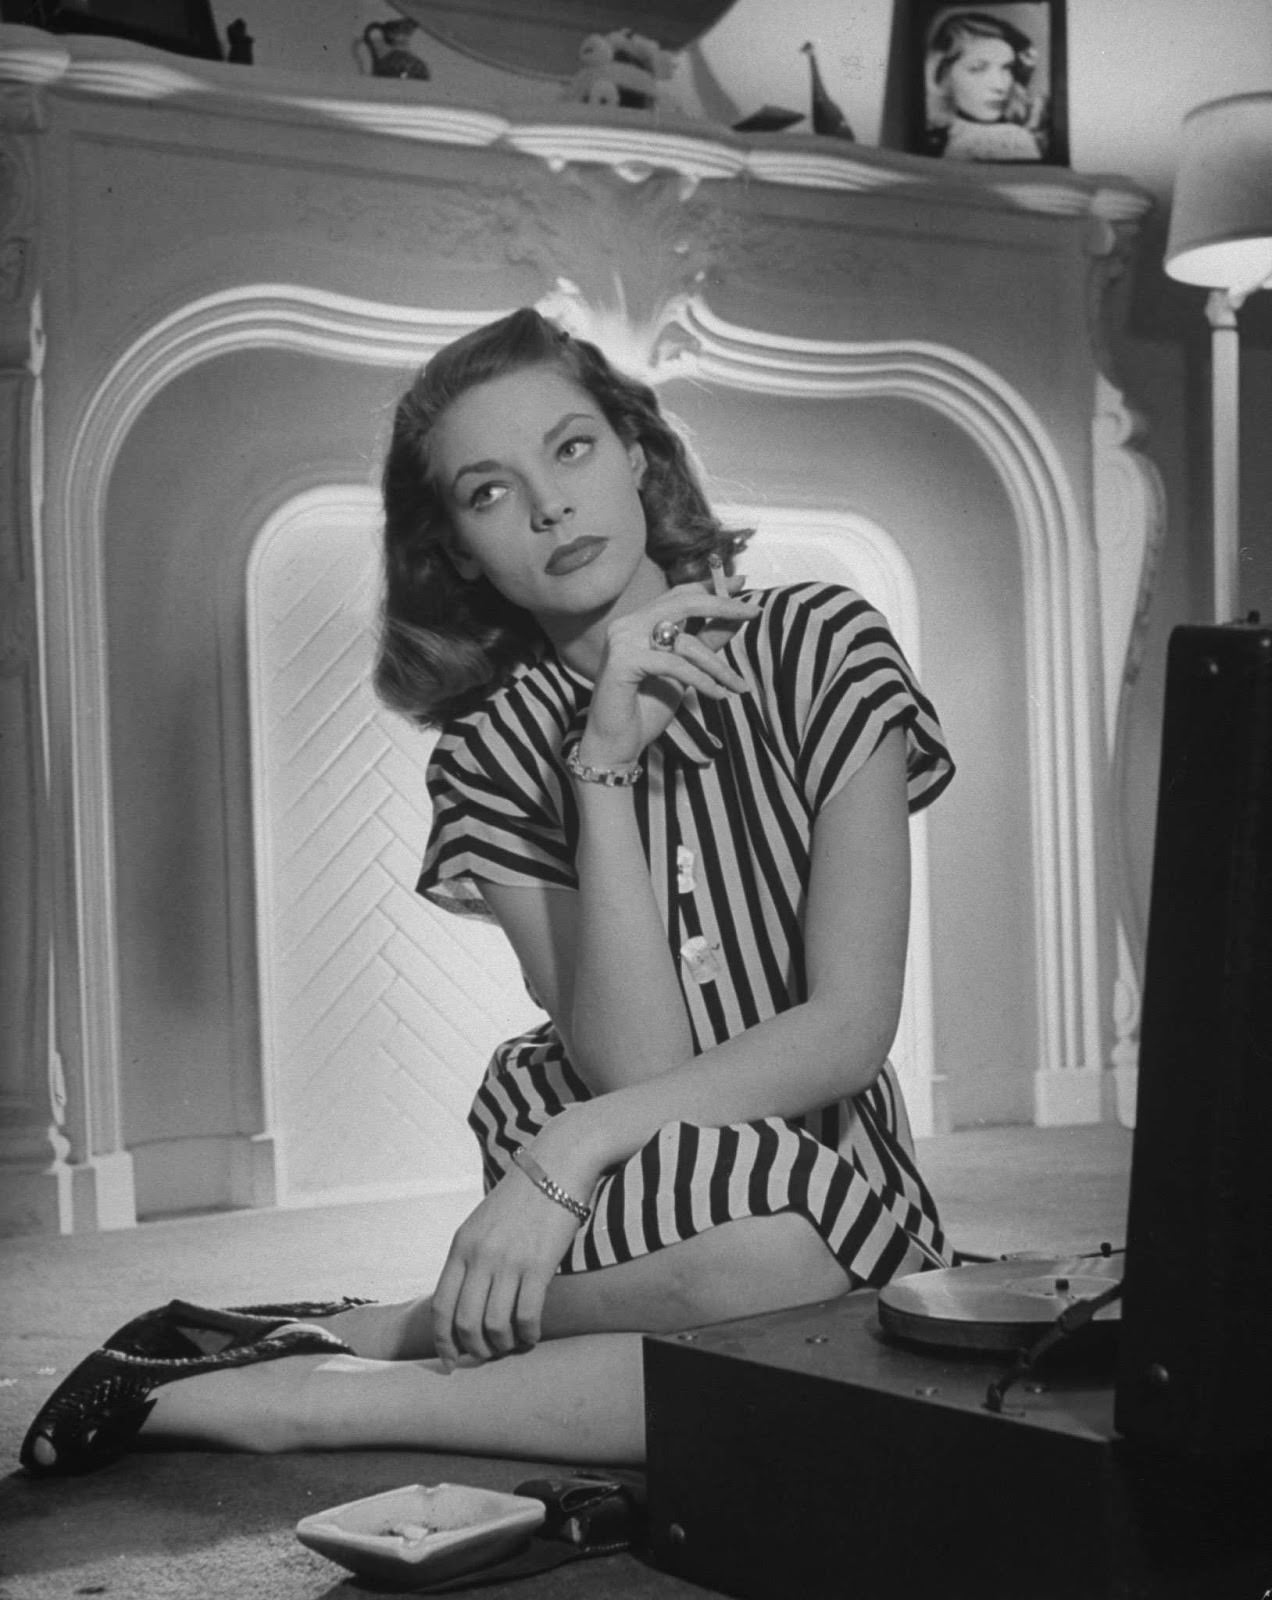 In 1945, she showed off a customary combination: striped tailored dress, smart wedges, and a cigarette.